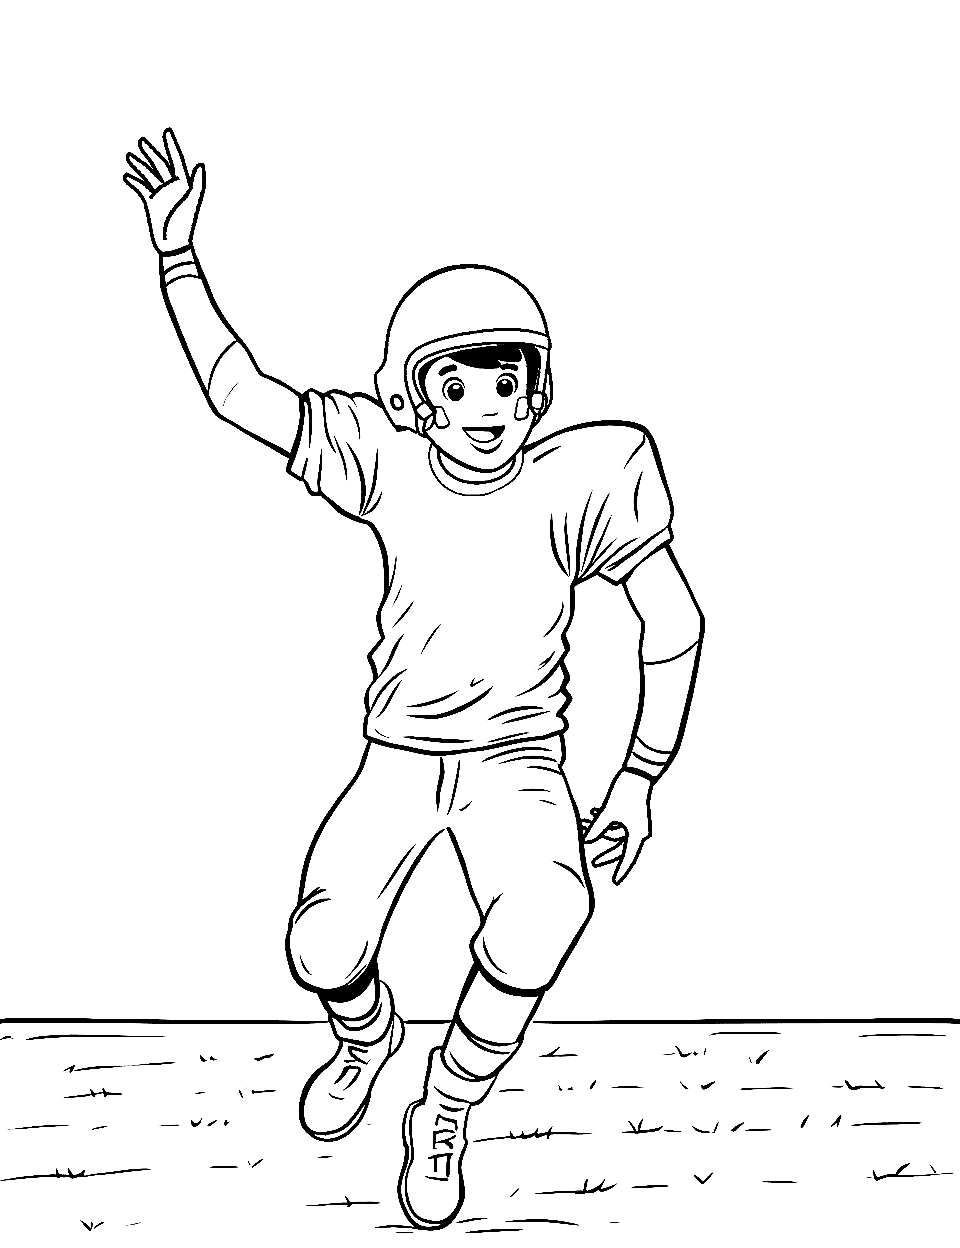 End Zone Celebration  Coloring Page - A player celebrating after a touchdown.